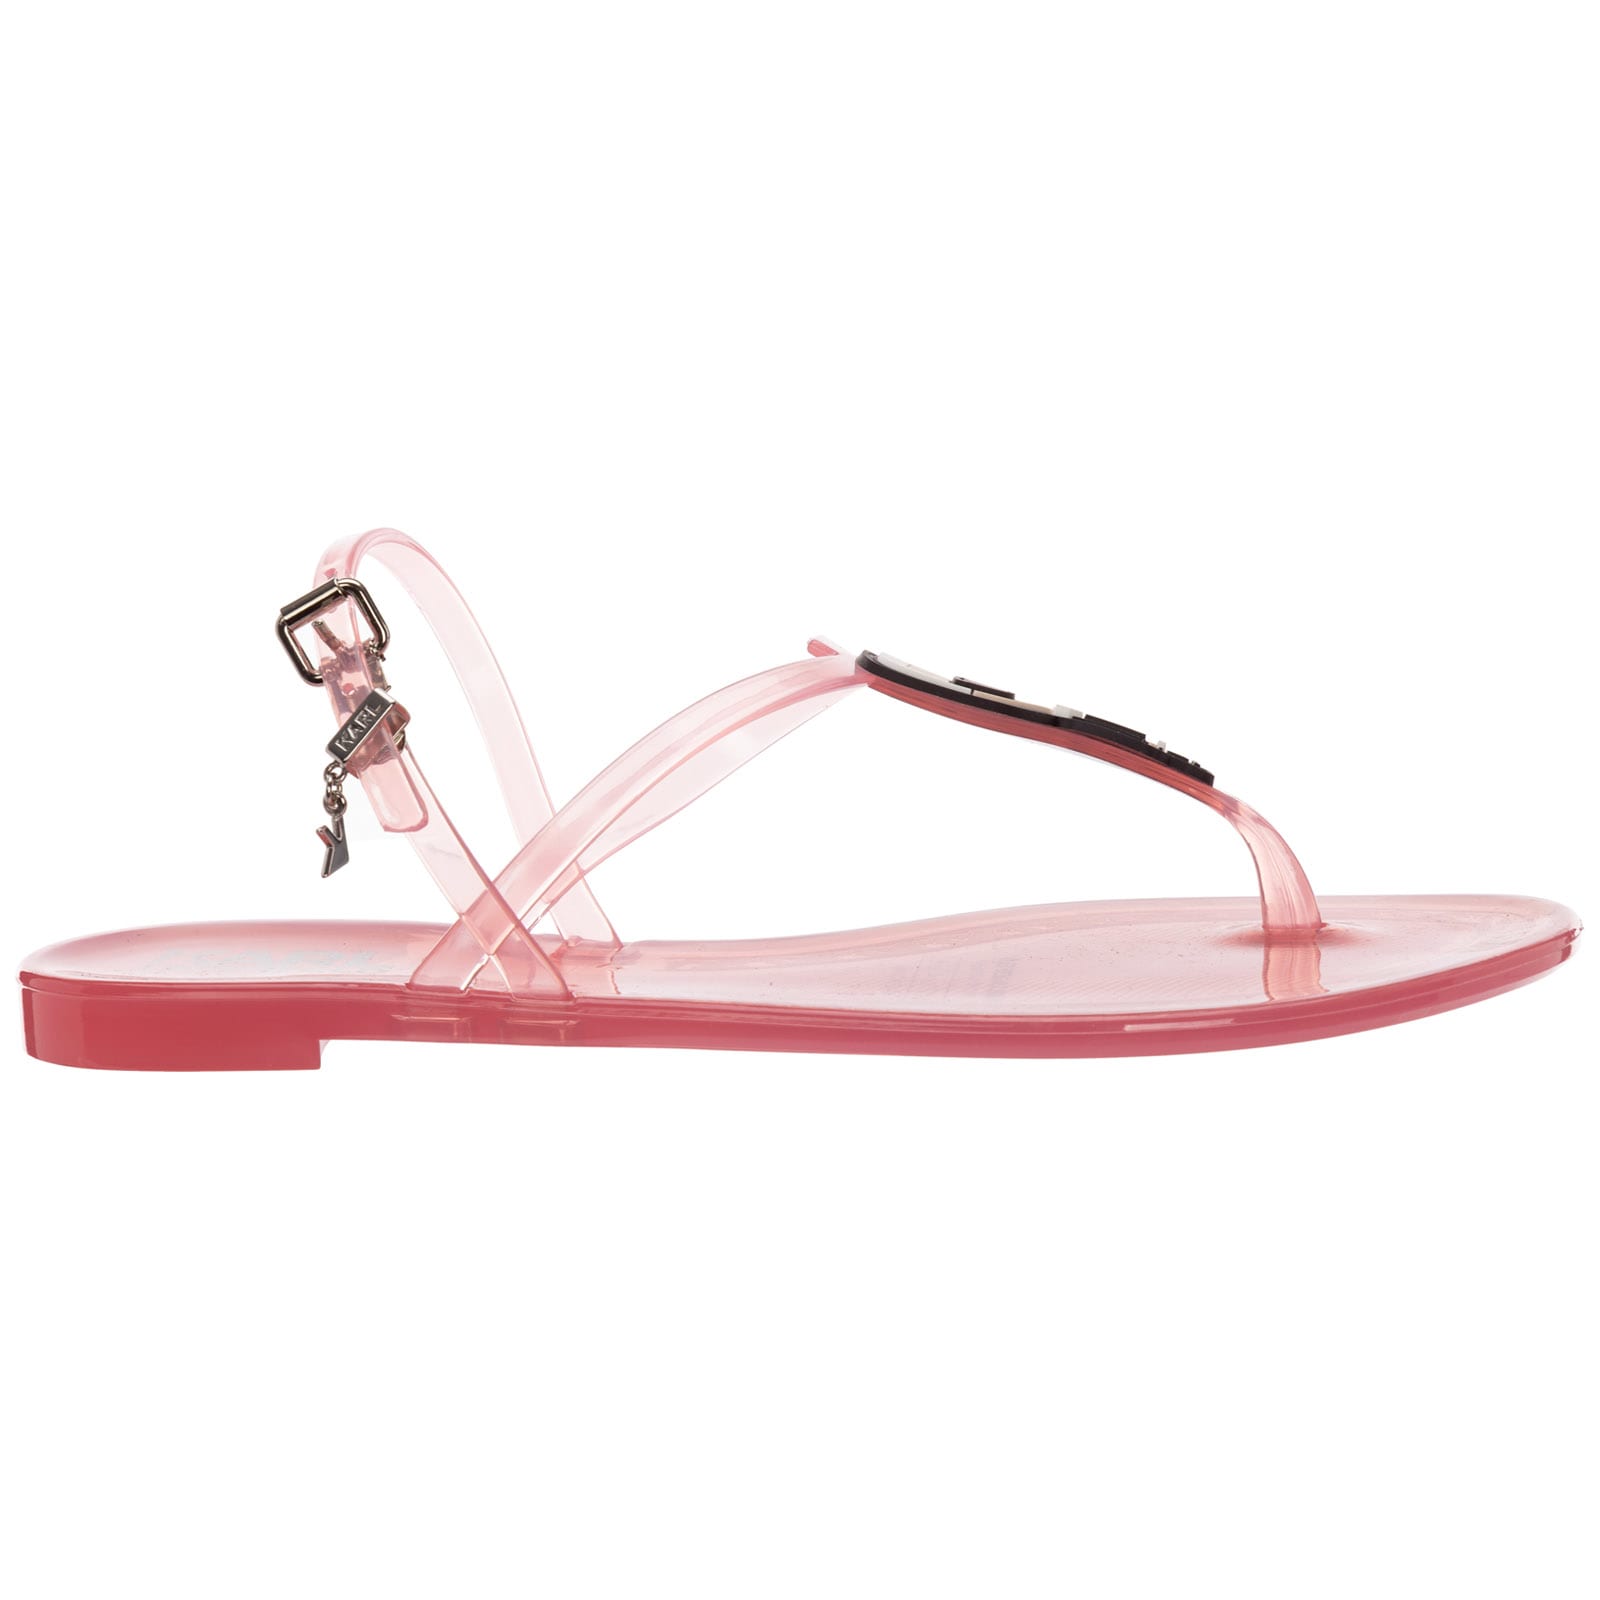 Buy Karl Lagerfeld Jelly T-bar Sandals online, shop Karl Lagerfeld shoes with free shipping